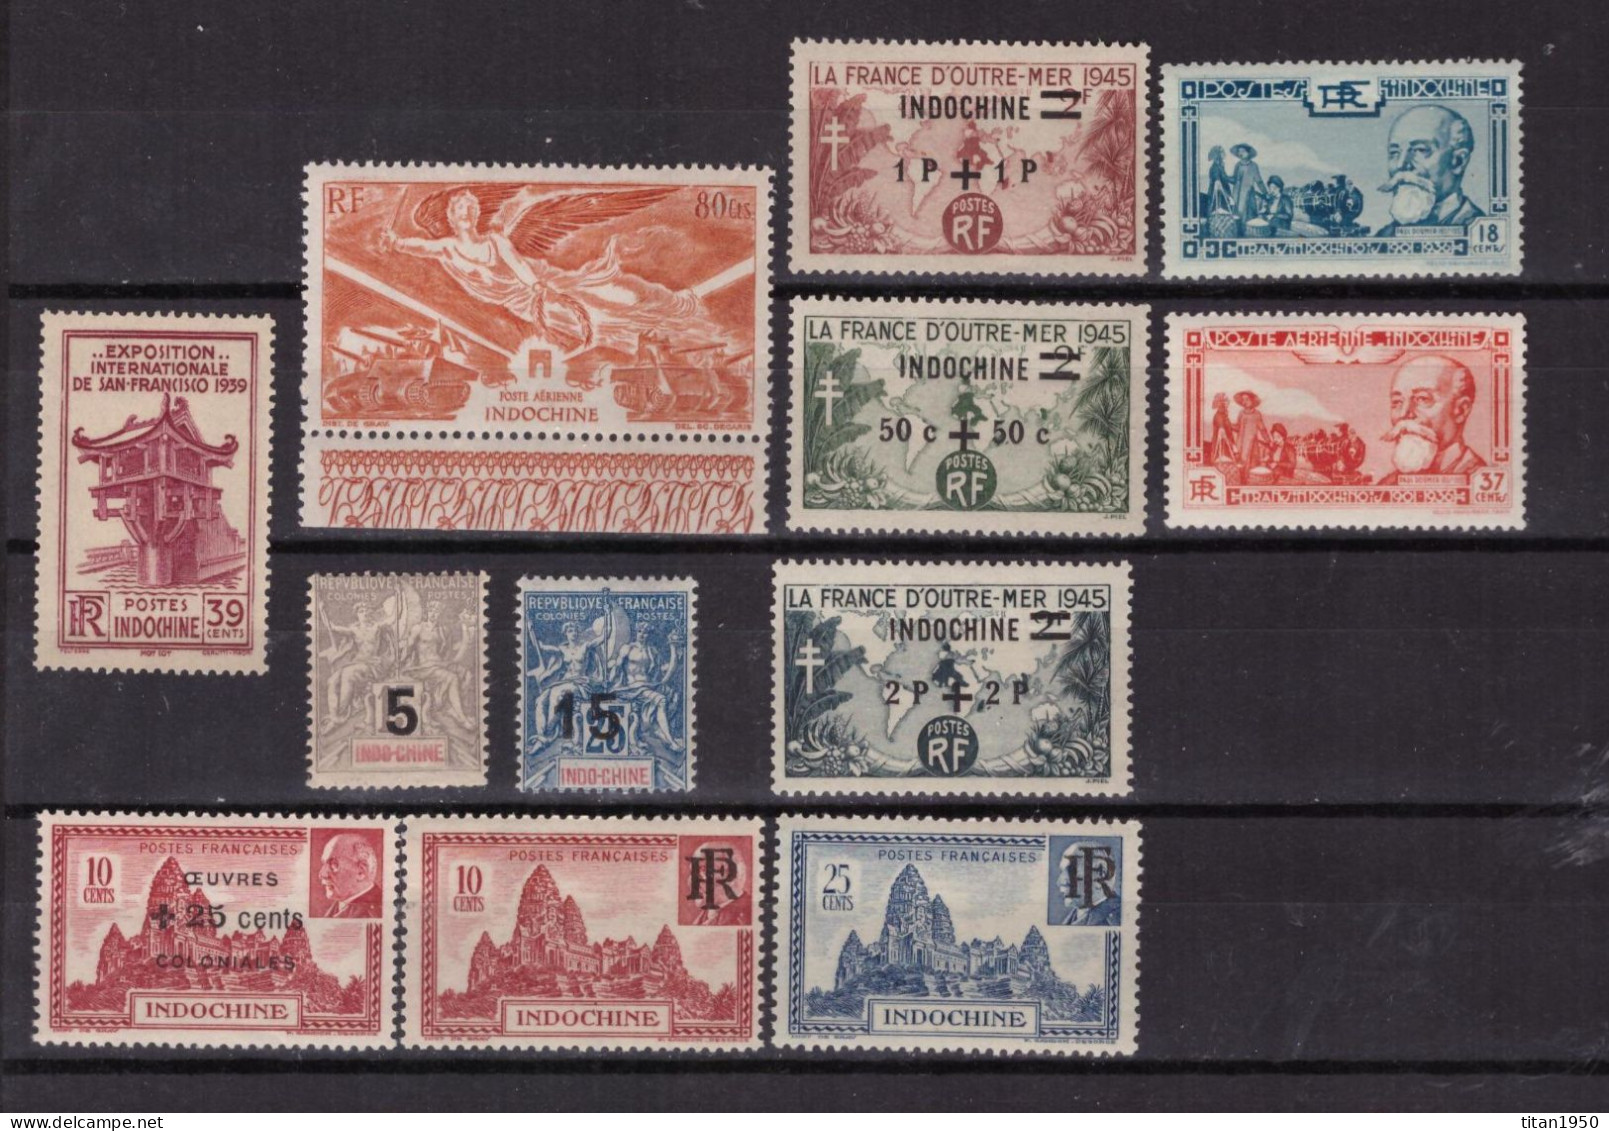 INDOCHINE - Divers - Lot De 12 Timbres Neufs ** - Cote 31,50 € - Unused Stamps